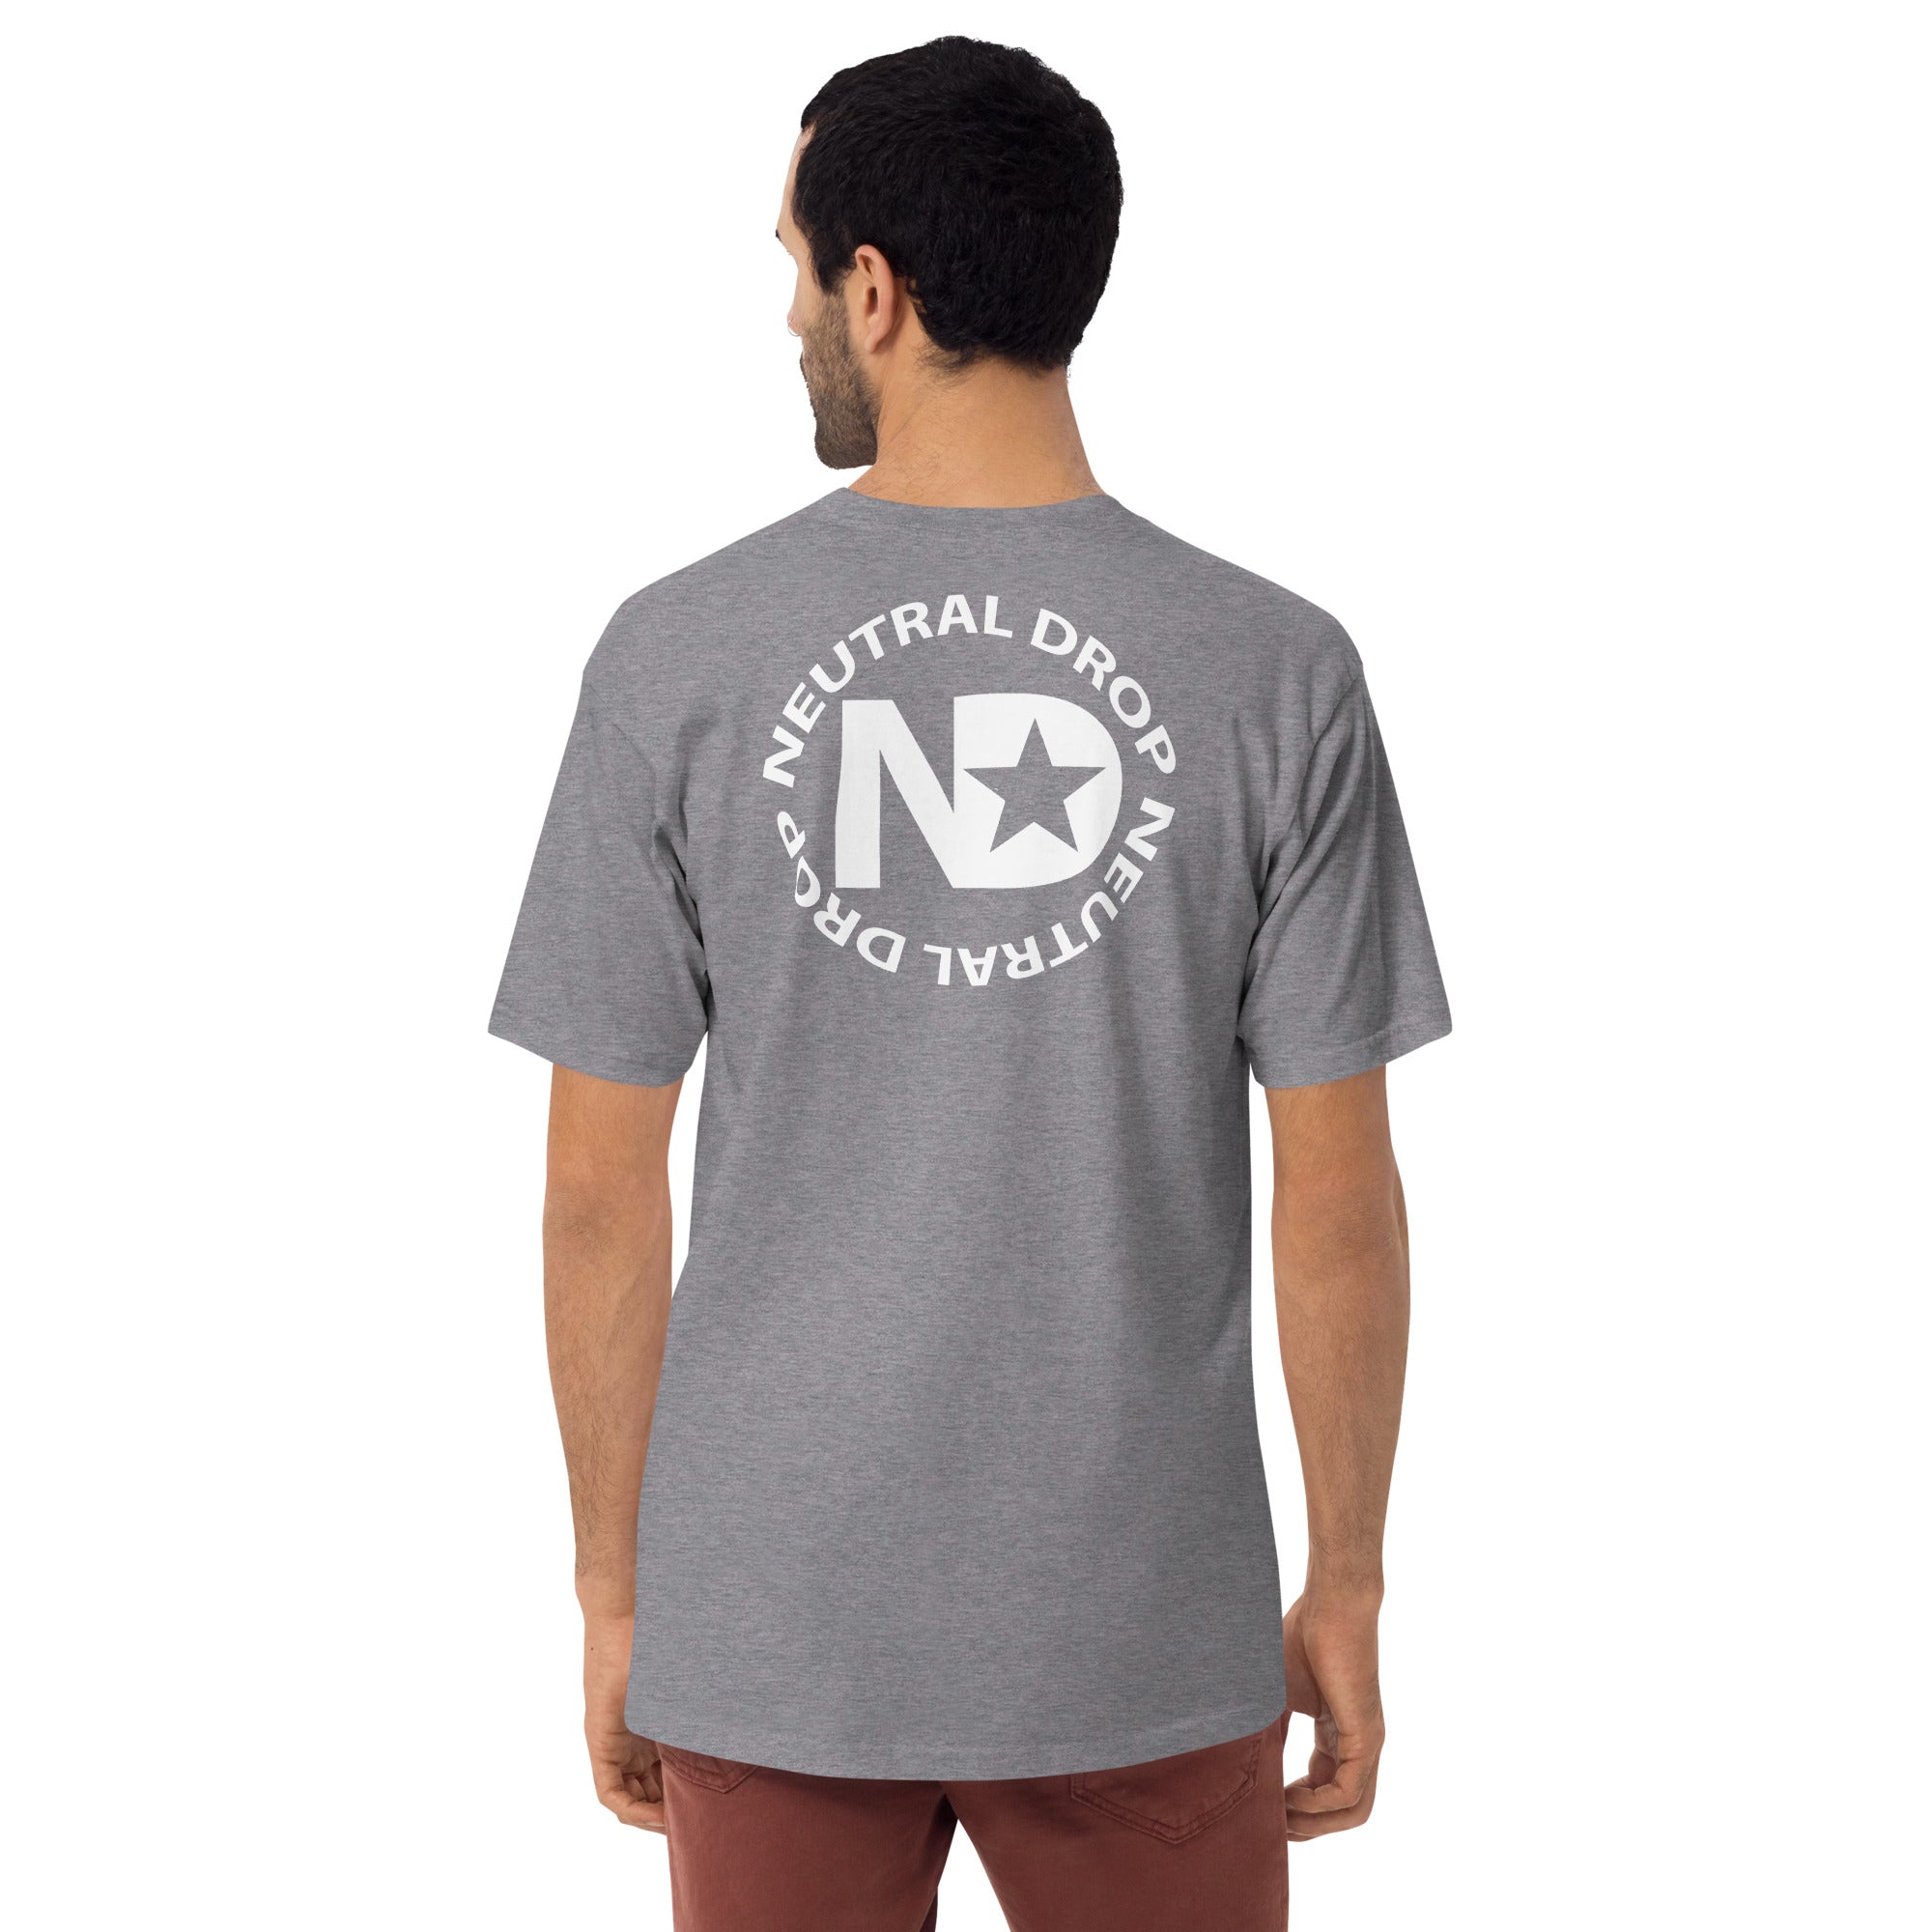 Men’s premium heavyweight tee with Neutral Drop Logo on Front and Back